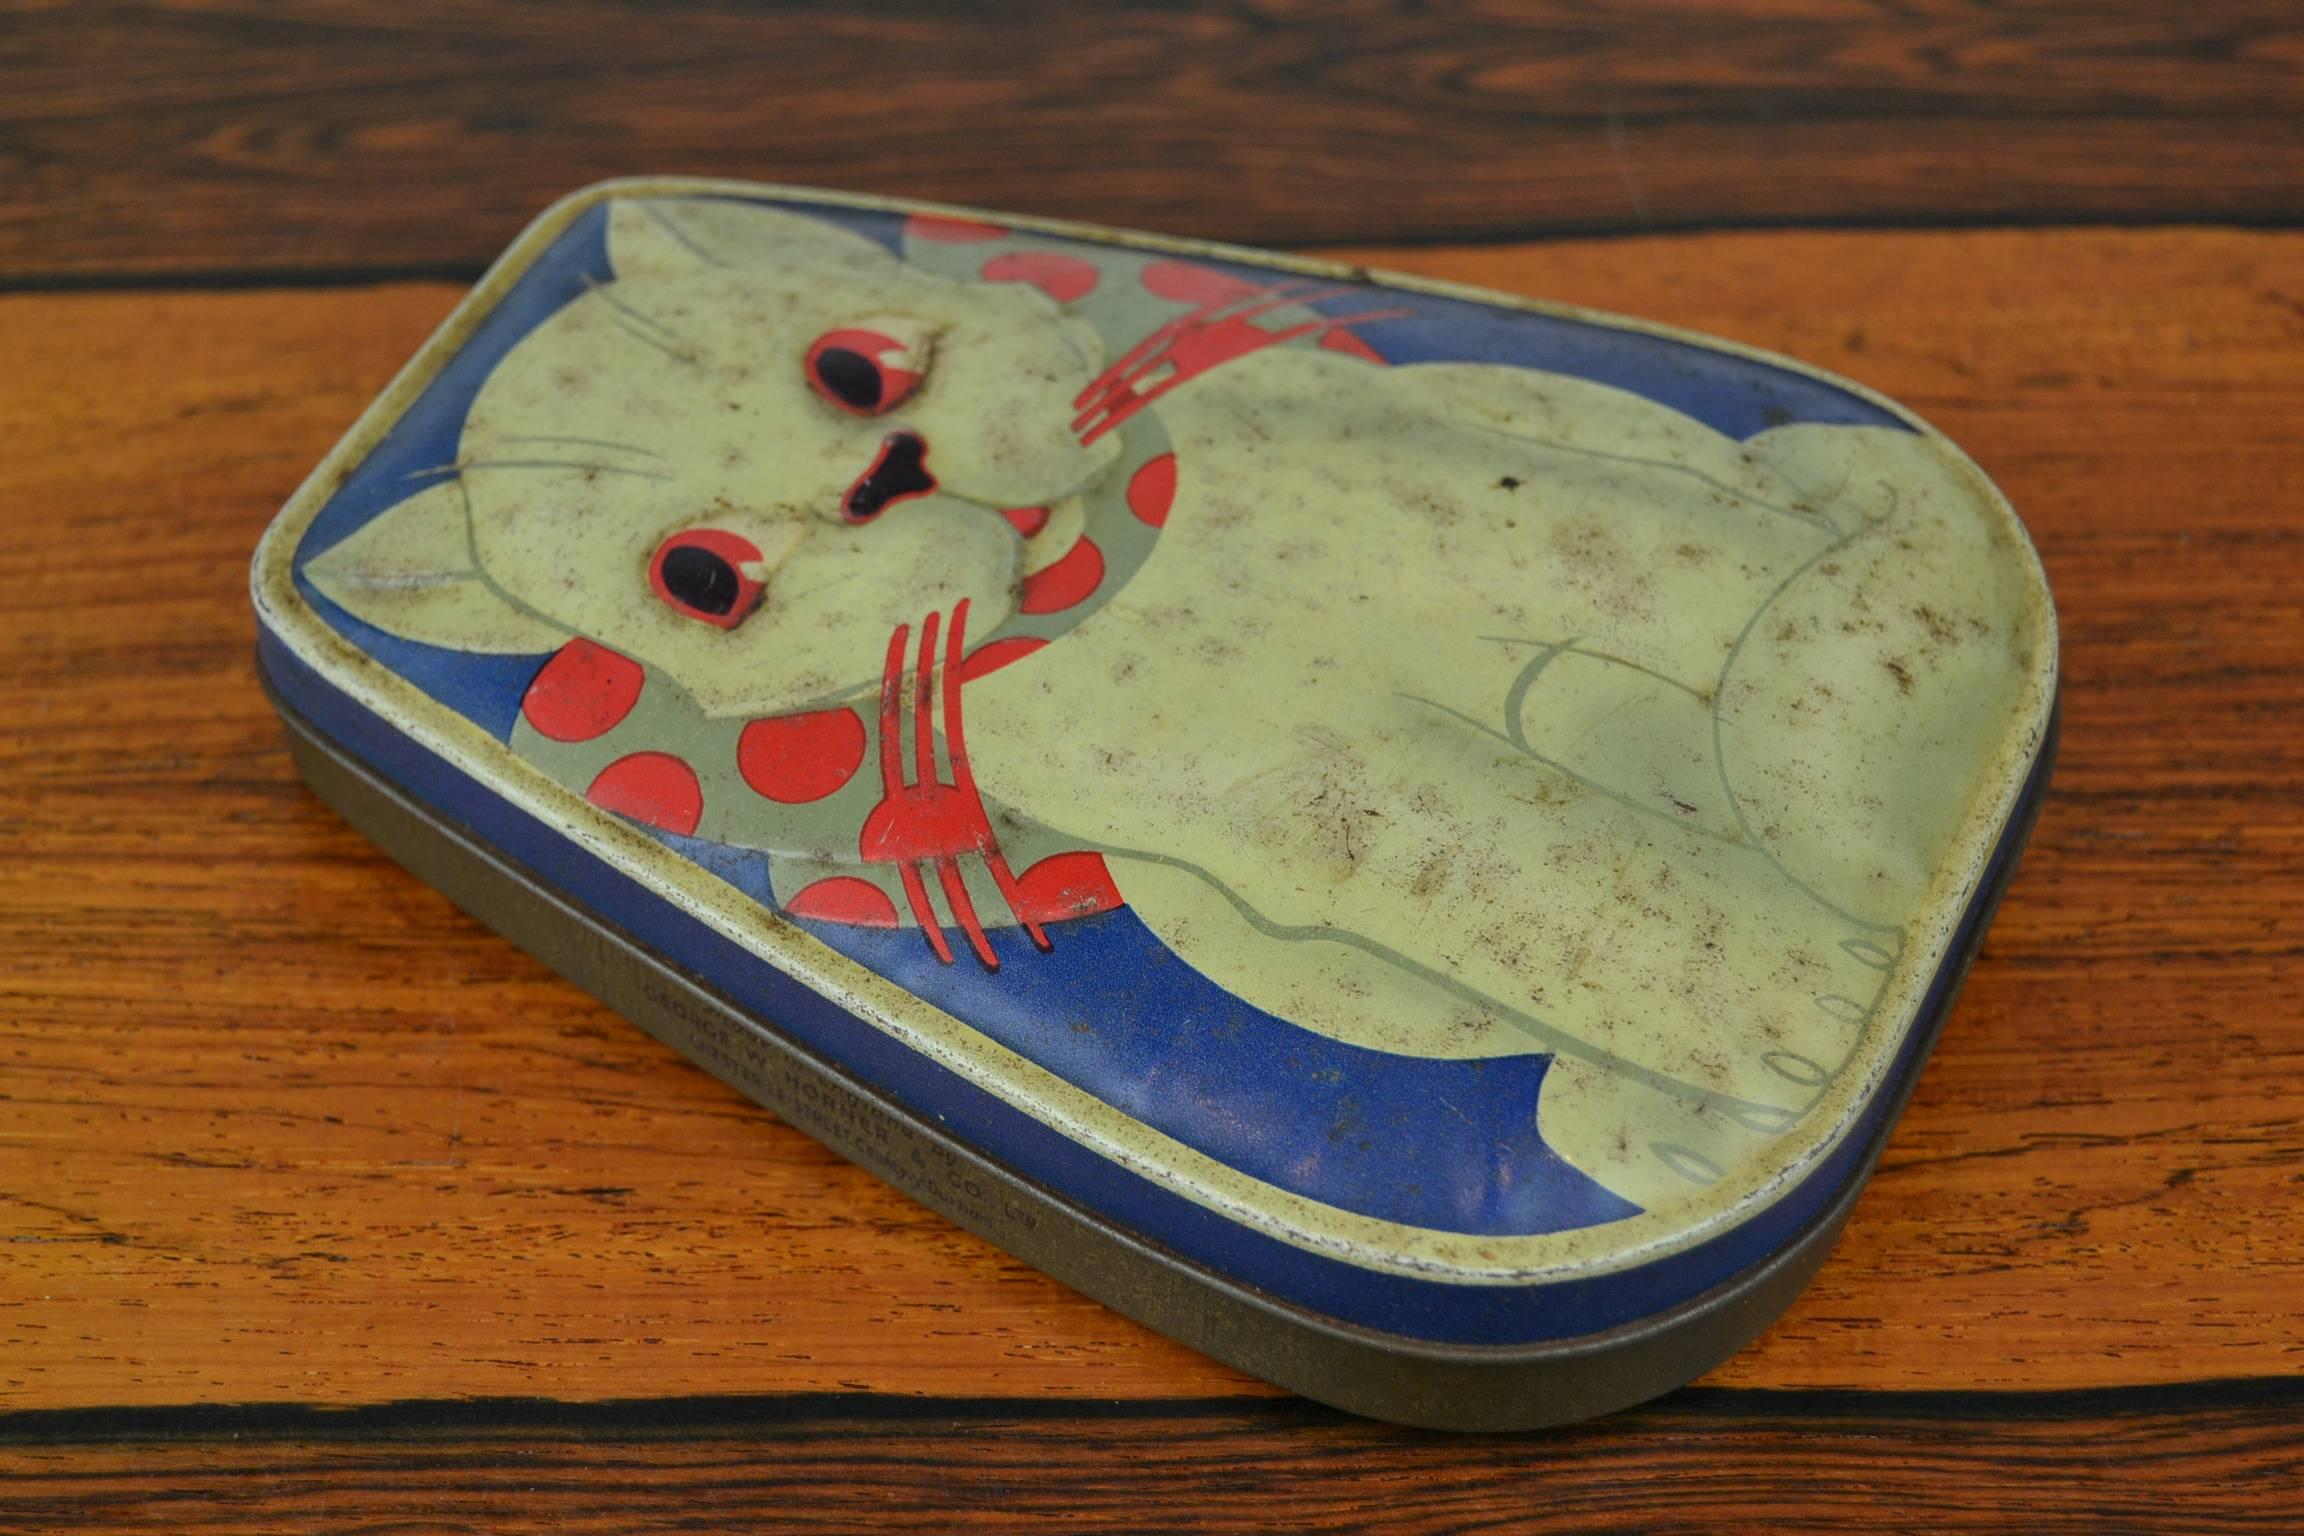 Cute vintage toffee tin box with a cat.
George W. Horner and co LTD - England, Chester le street. 
Art Deco Embossed Tin Box with white cat - puss on blue bottom. 
This serie of tins started in the 1930s. 
It has the combination of the colors white,